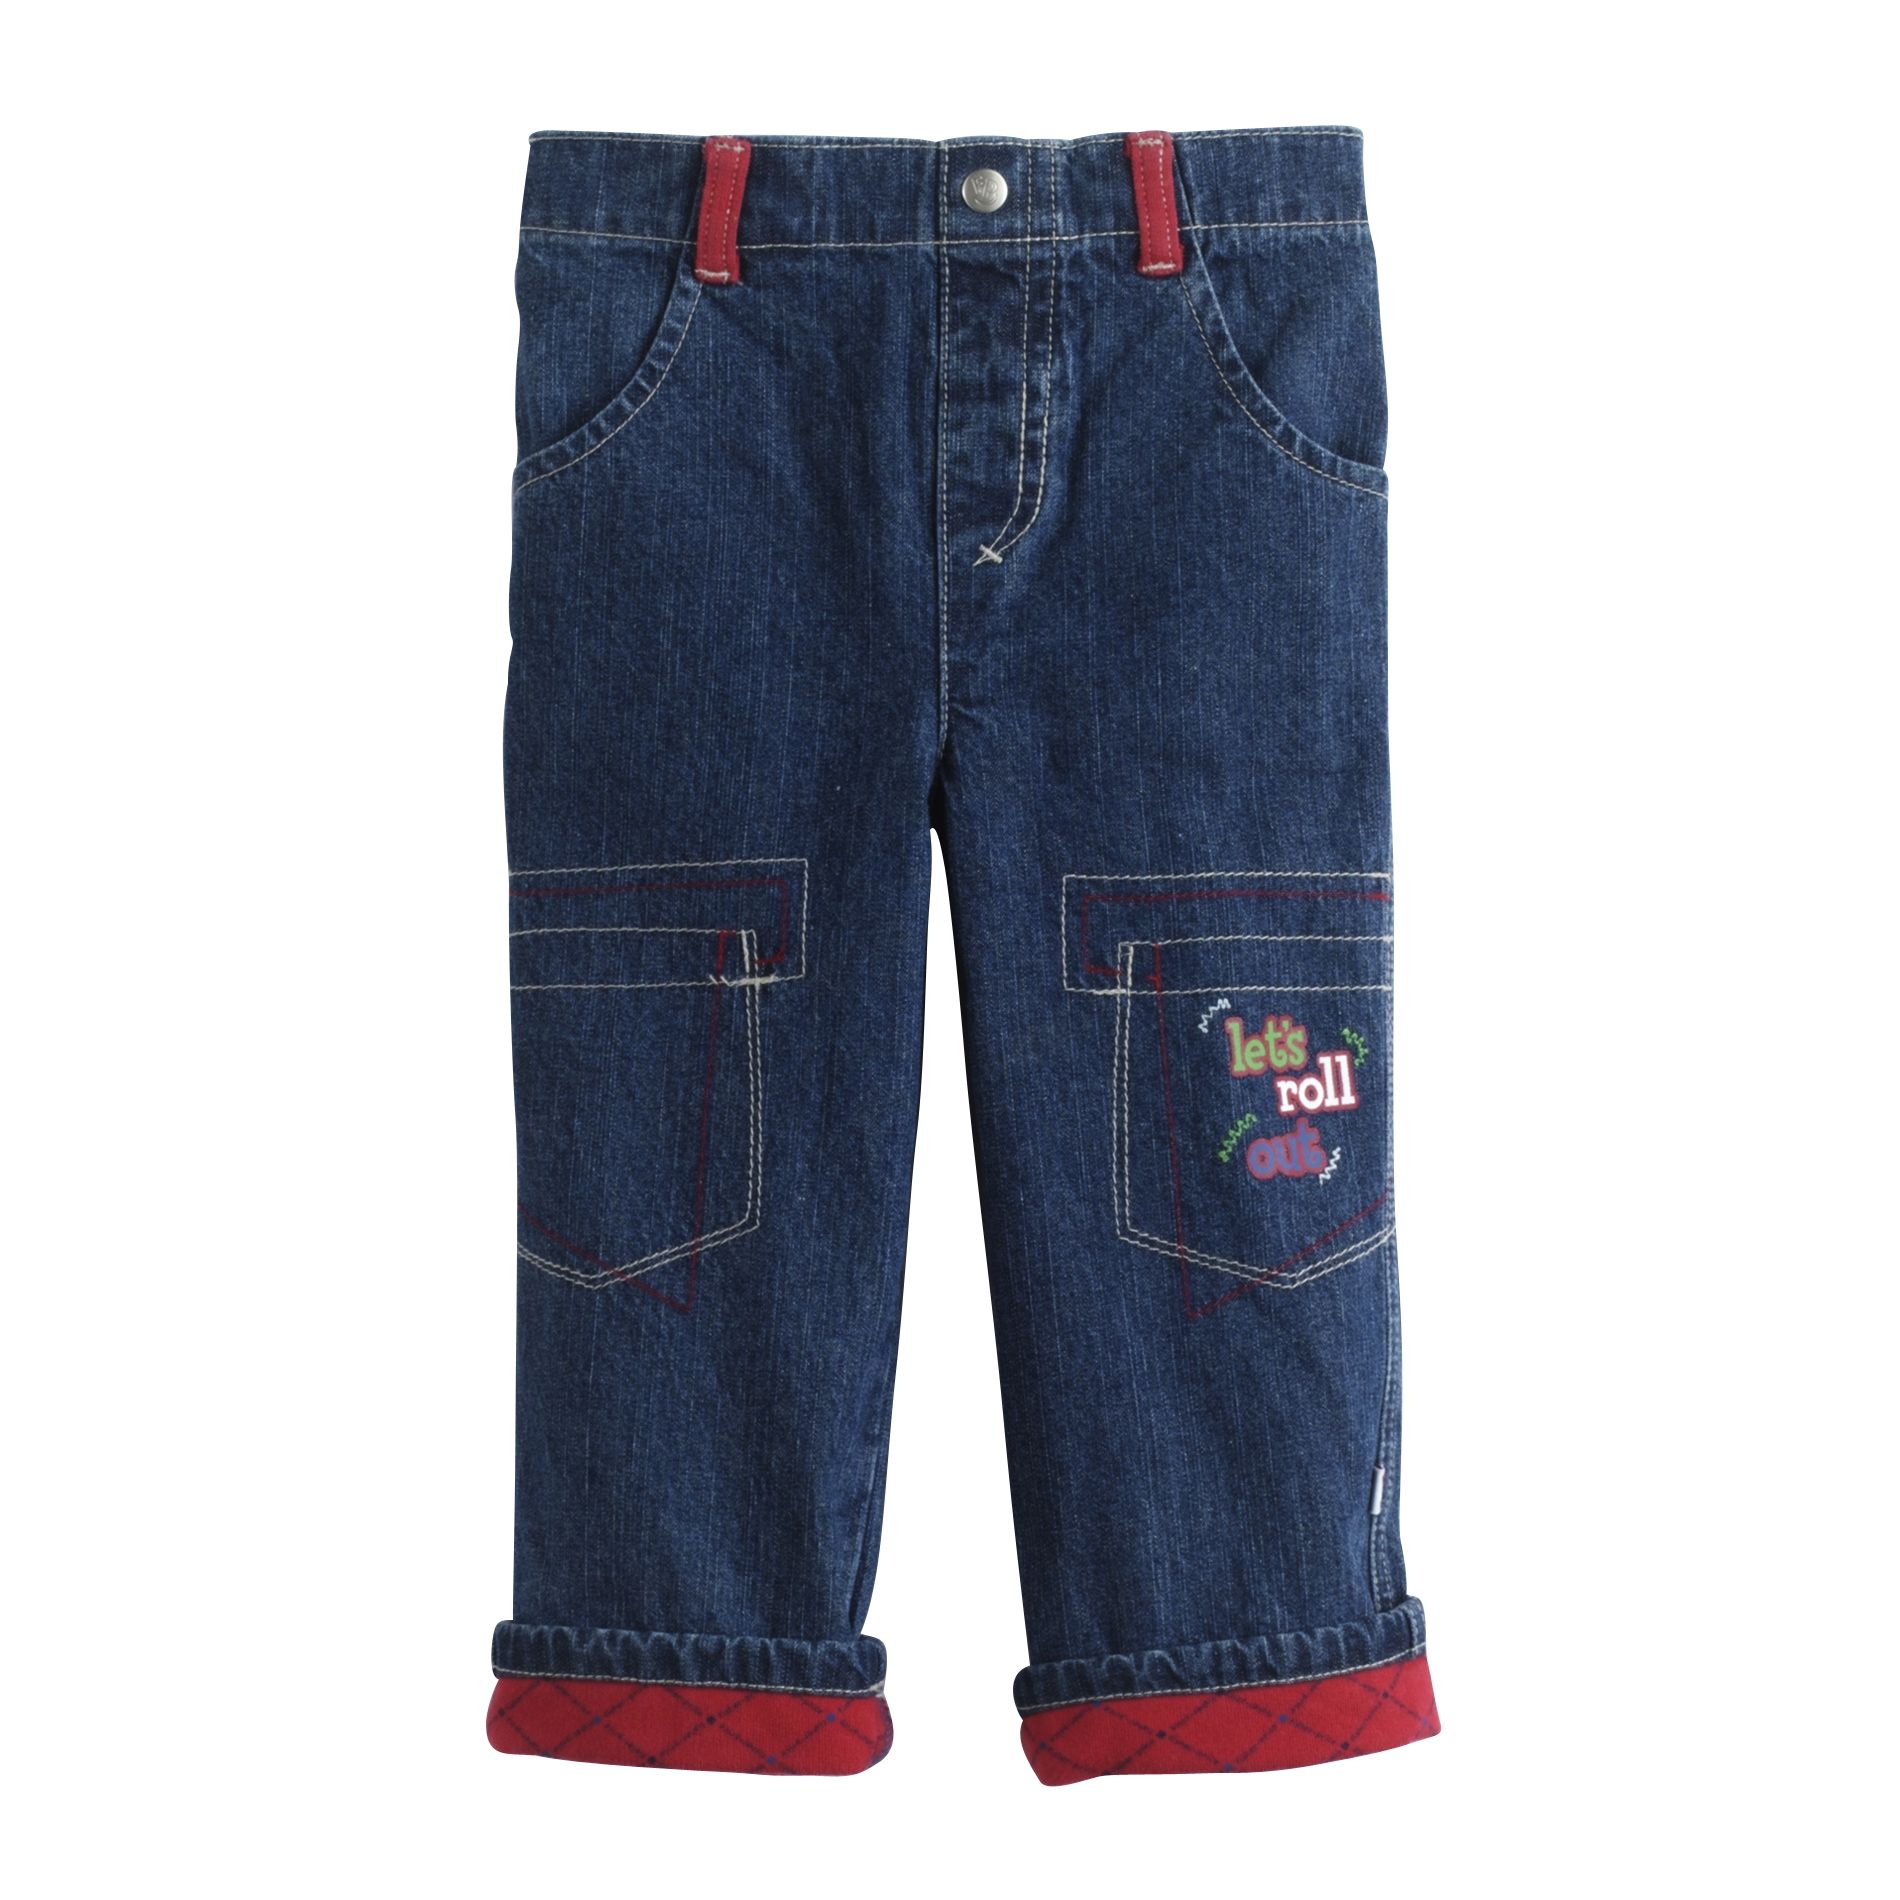 Fisher-Price Toddler Boy's Lets Roll Out Denim Pants